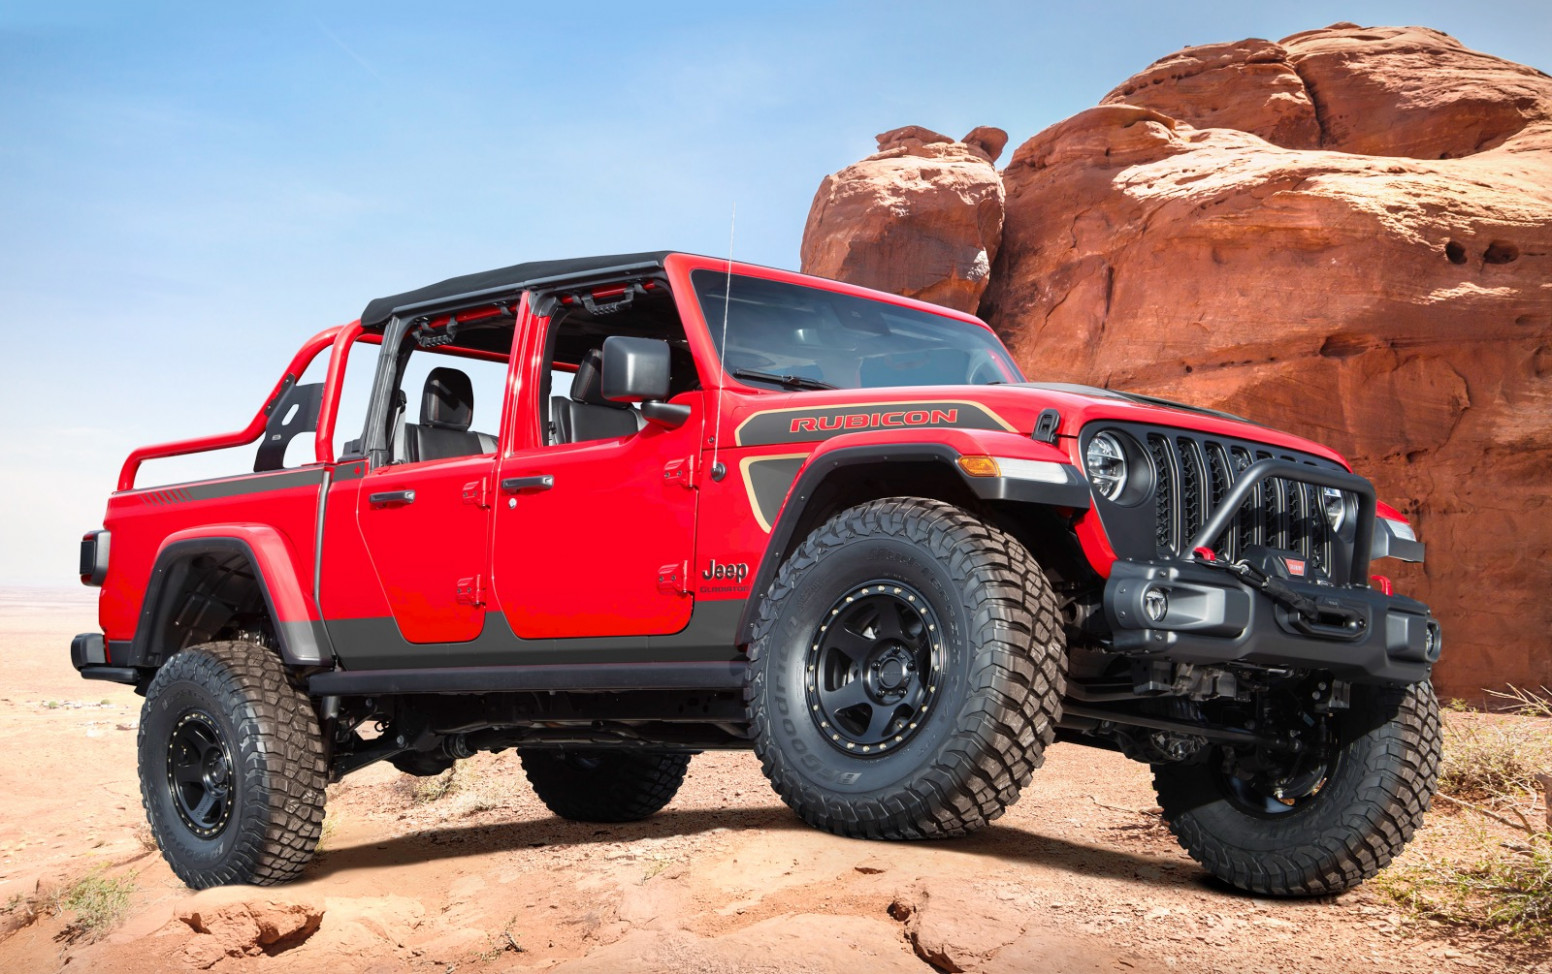 Pricing When Does The 2023 Jeep Gladiator Come Out